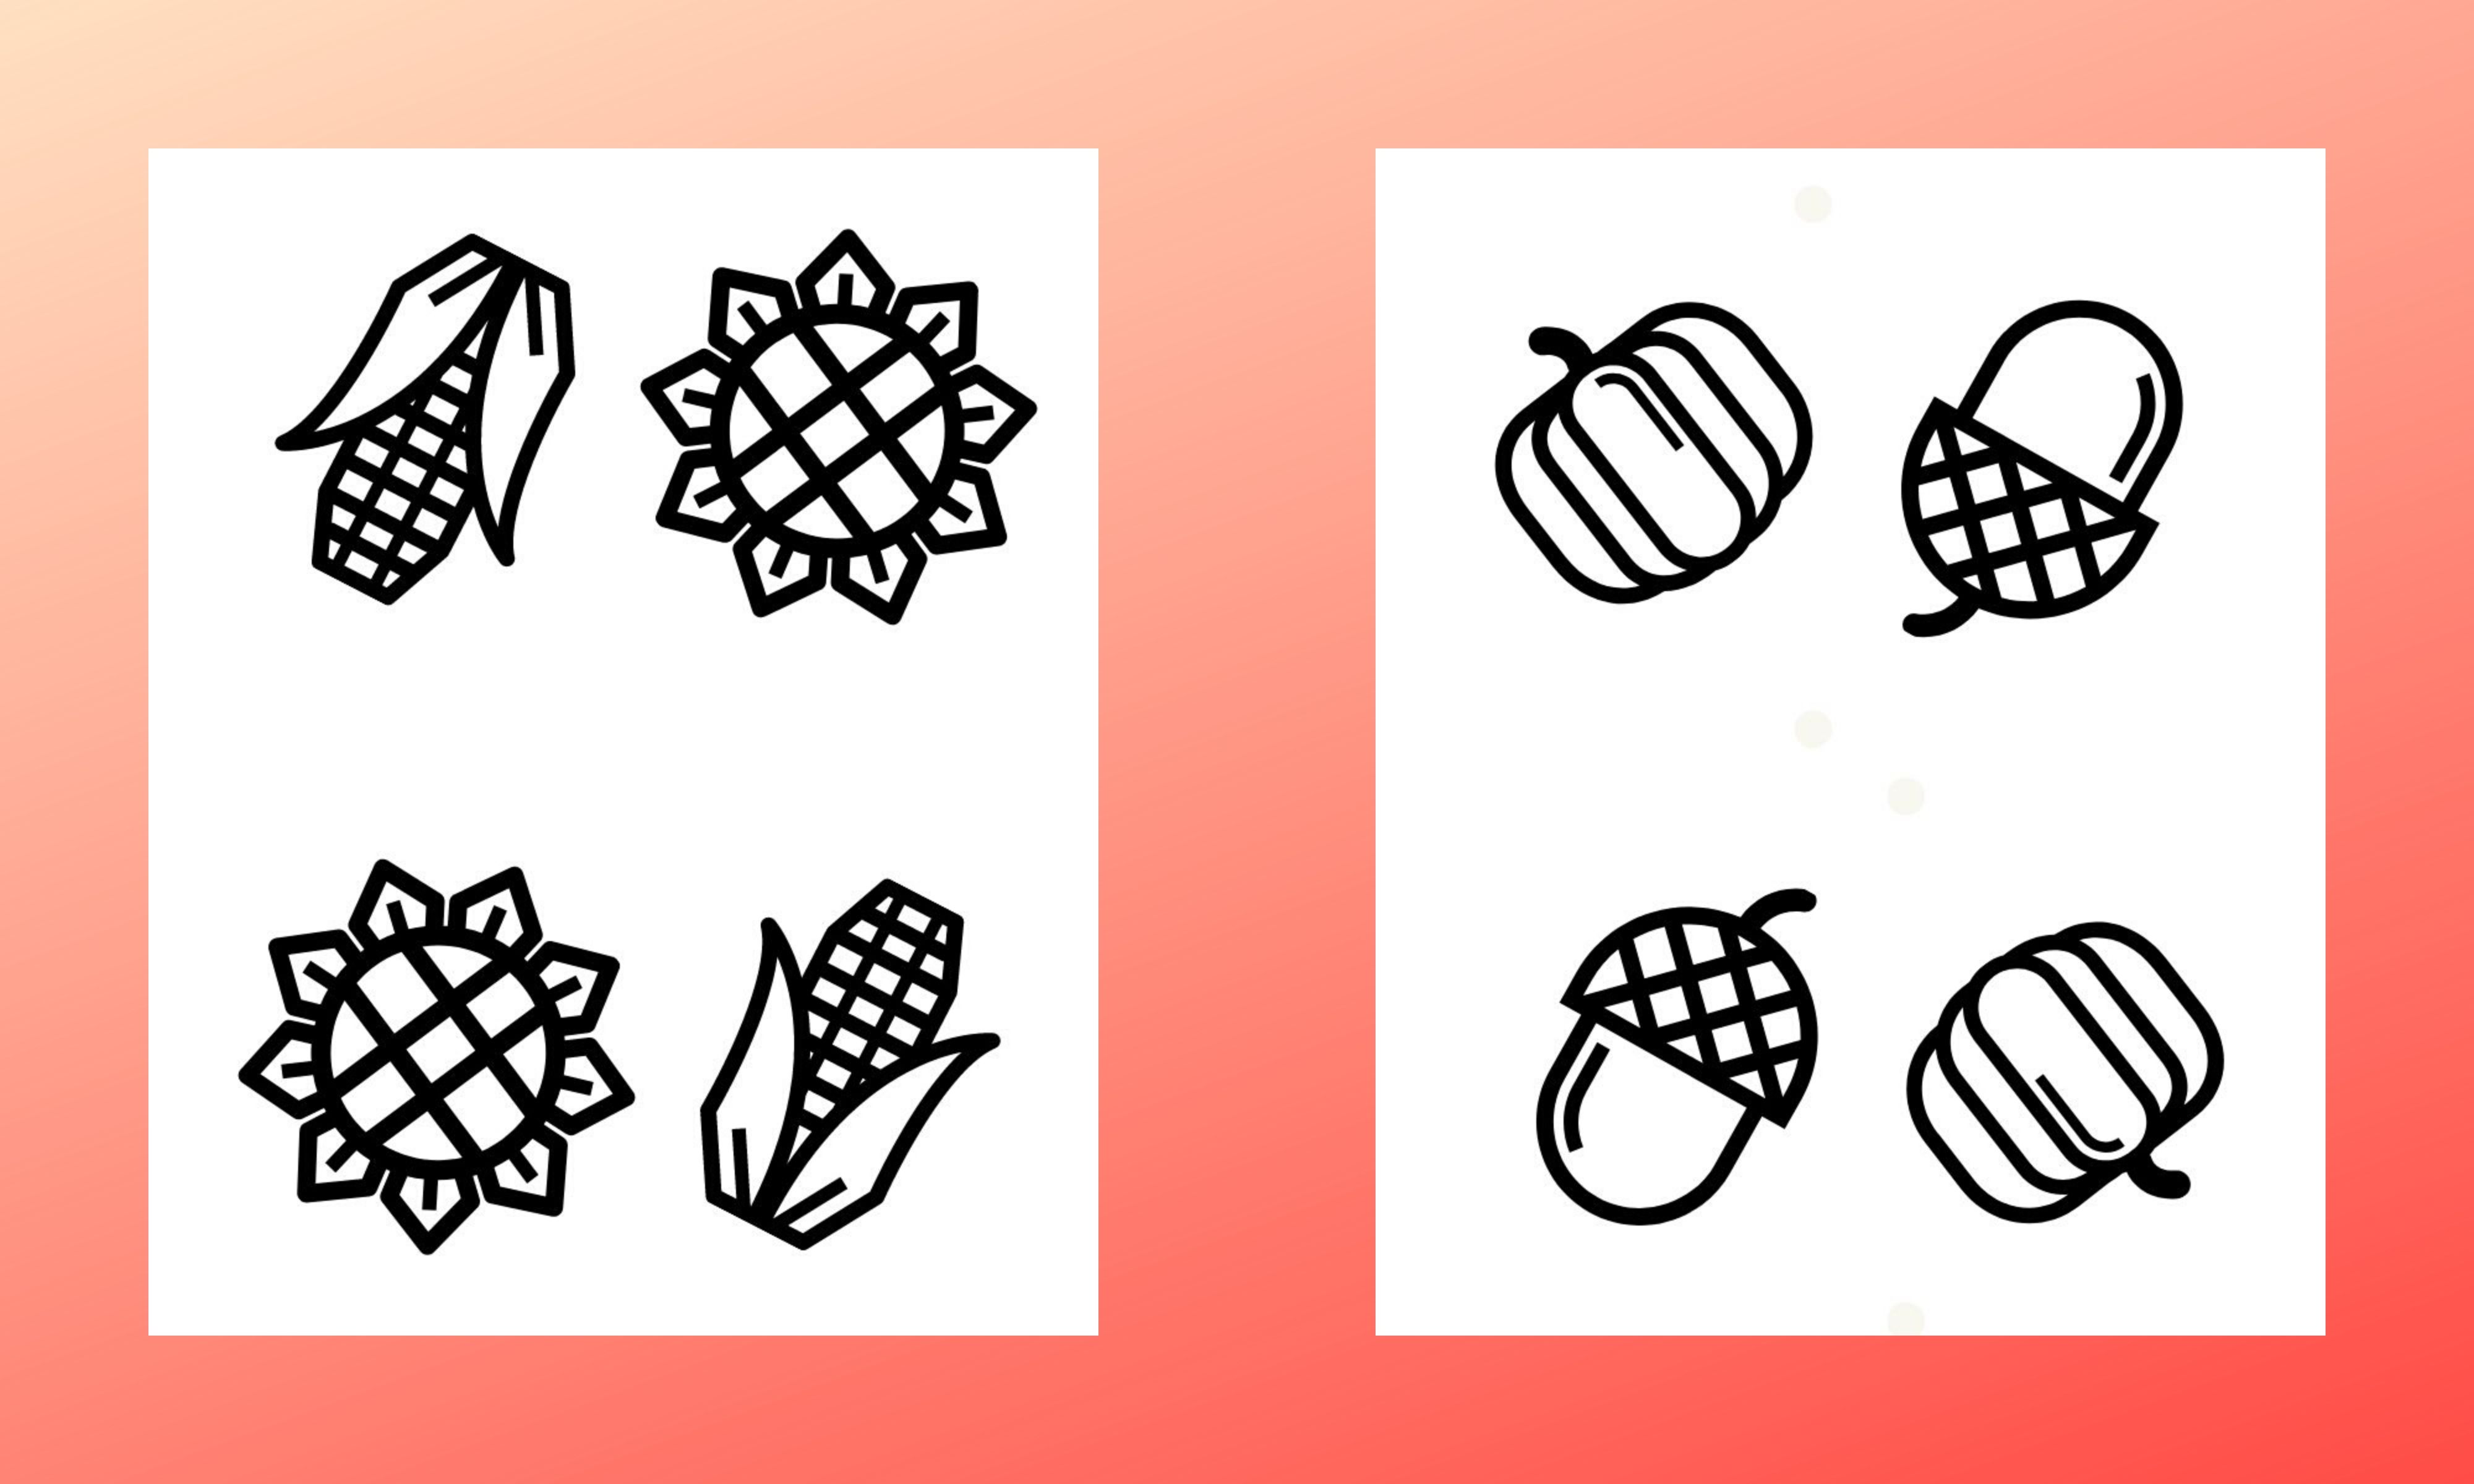 Black and white templates of an acorn, flower, pumpkin, and a corn.